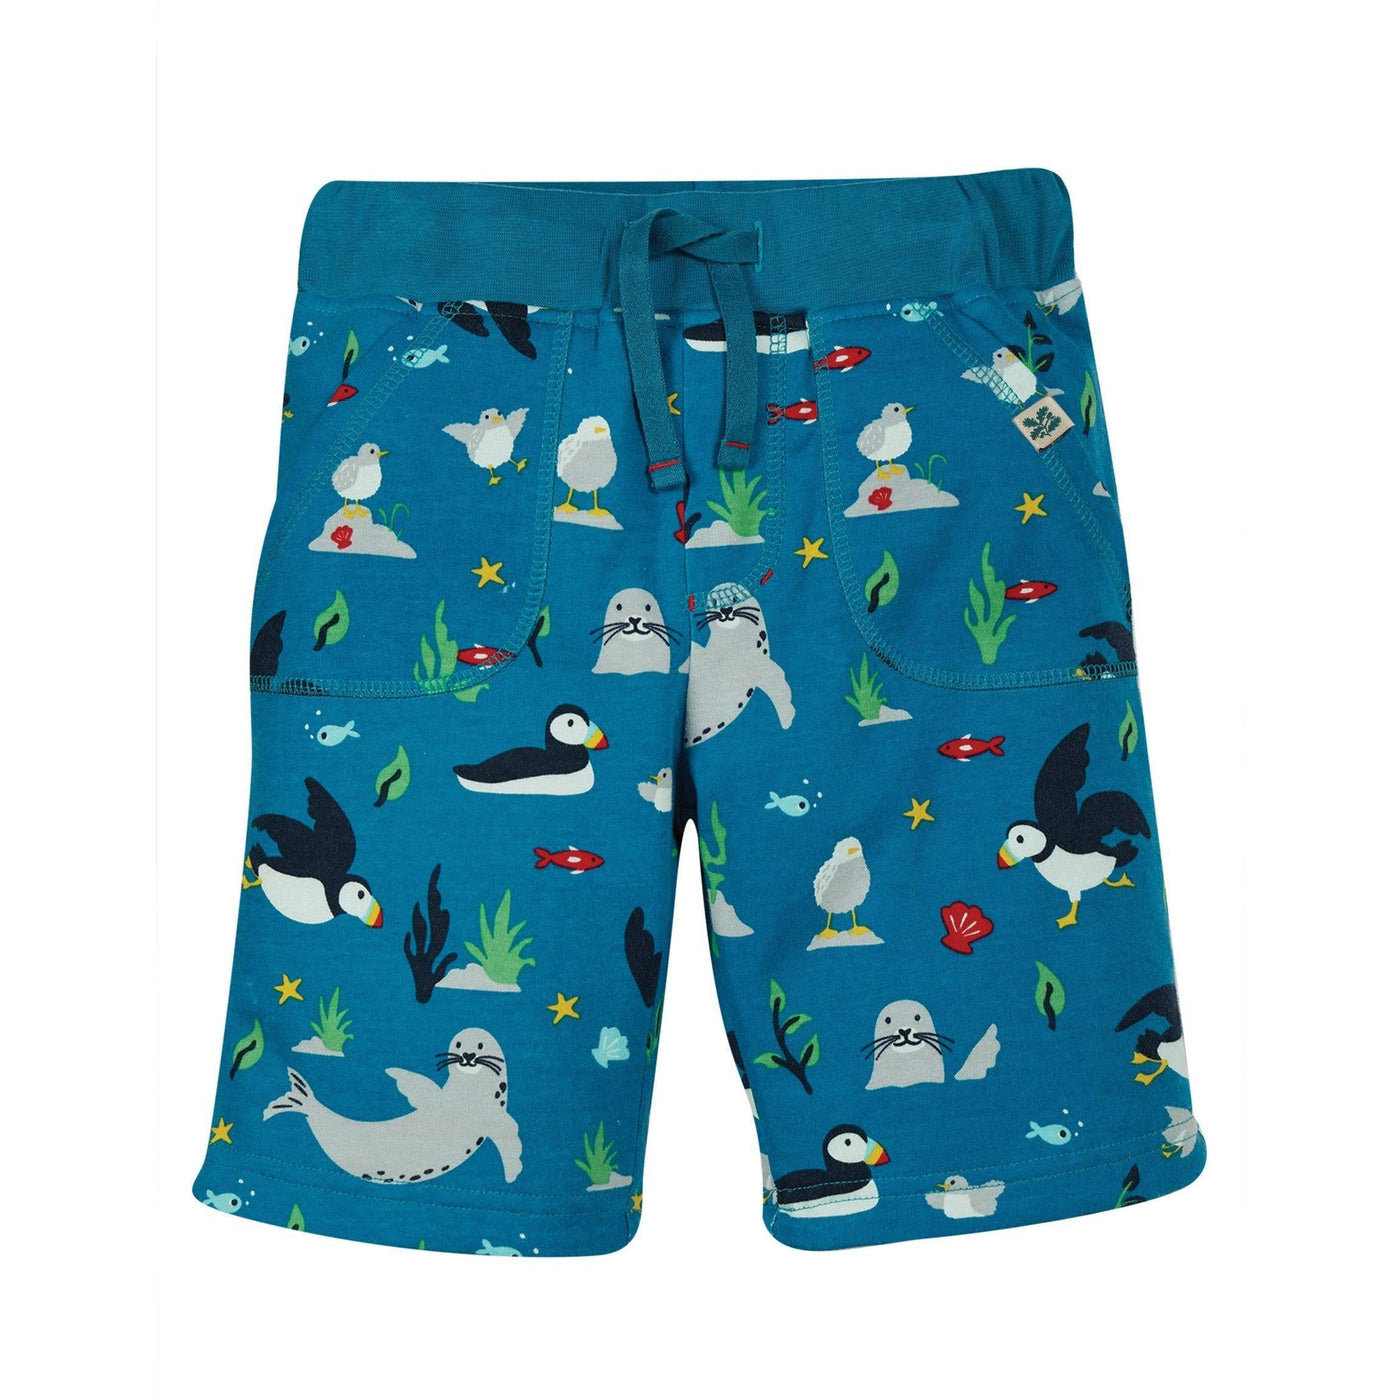 The National Trust Reversible Shorts Puffin by Frugi